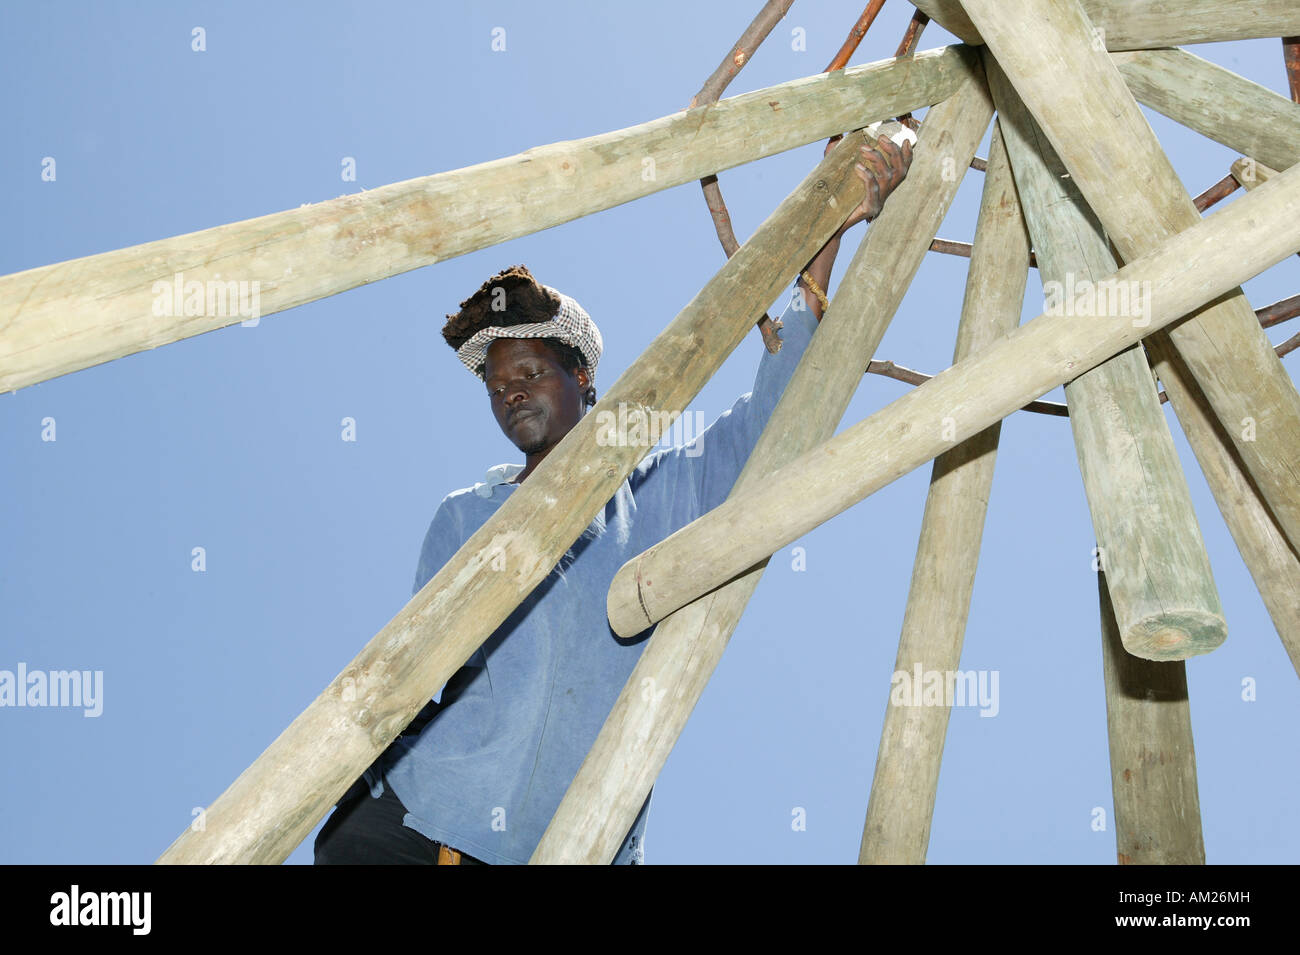 Man building a truss of a traditionial round hut, Rasta Community, Cape Town, South Africa Stock Photo